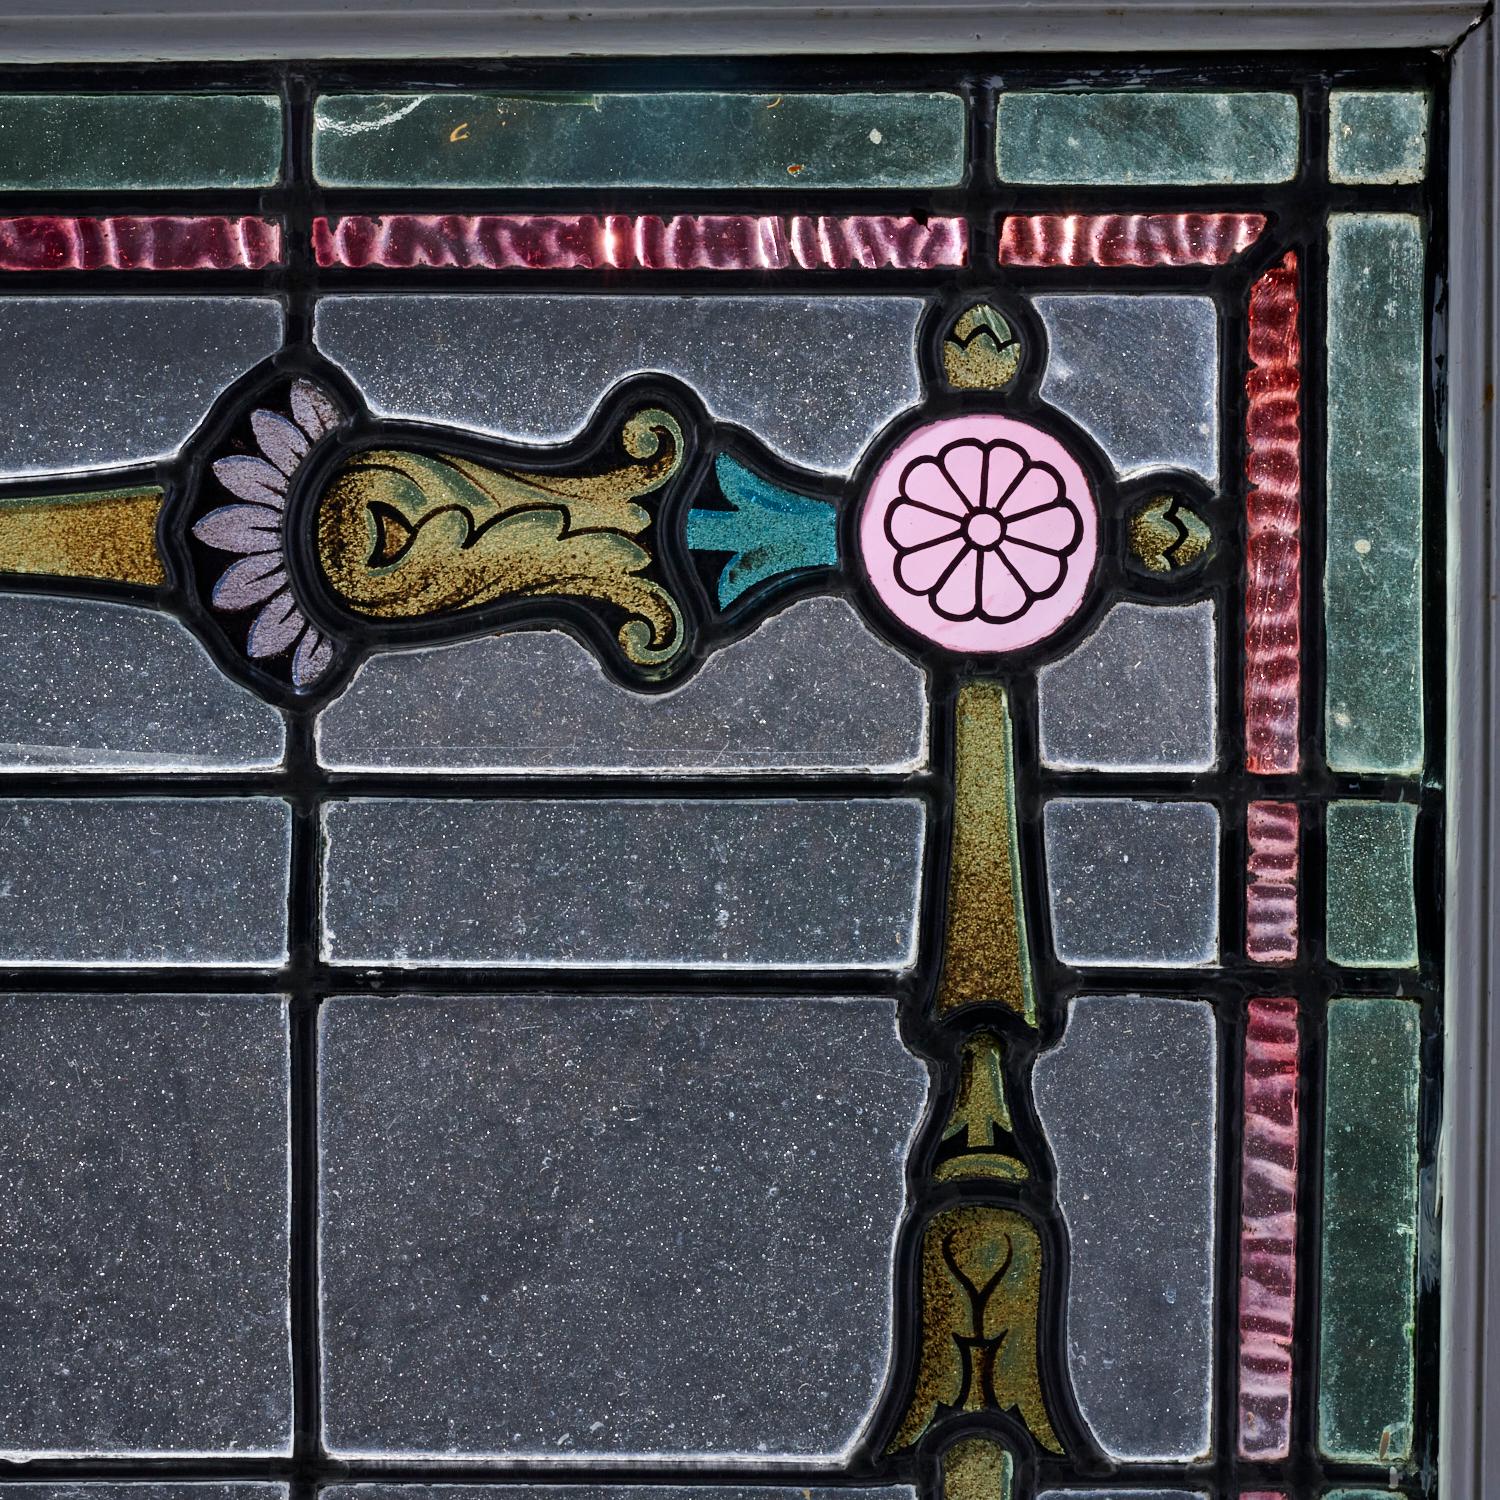 Early 20th c., a lovely pair of stained glass leaded windows in wood frames with hinges attached. The design could be interpreted in many ways. They could be considered to represent swords with hilts or a stylised floral trellis. The pink floral